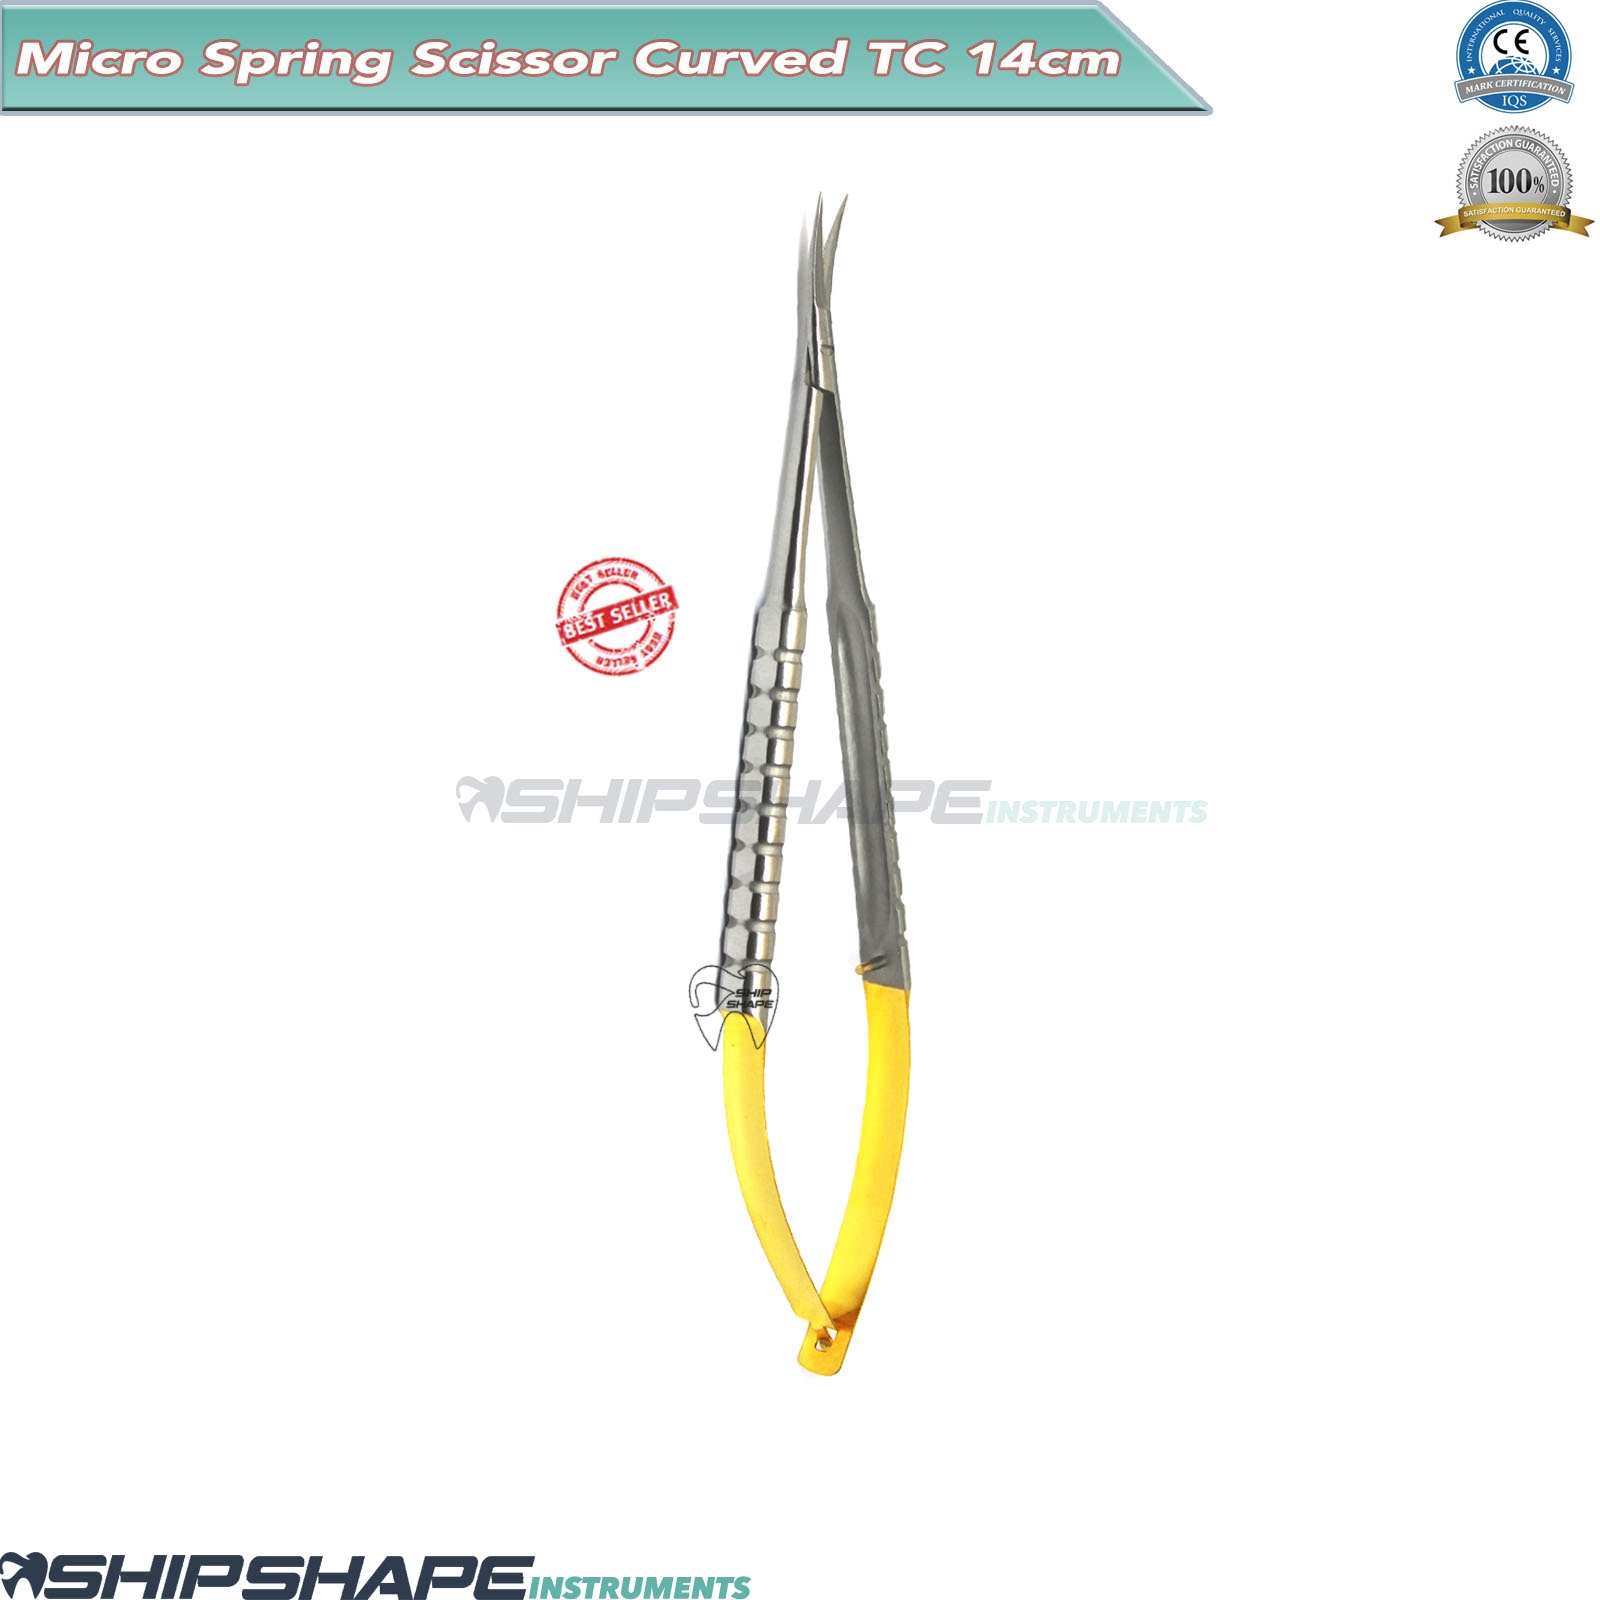 Professional MICRO Scissor Curved Dental Ophthalmic Spring Action Scissors TC-1779